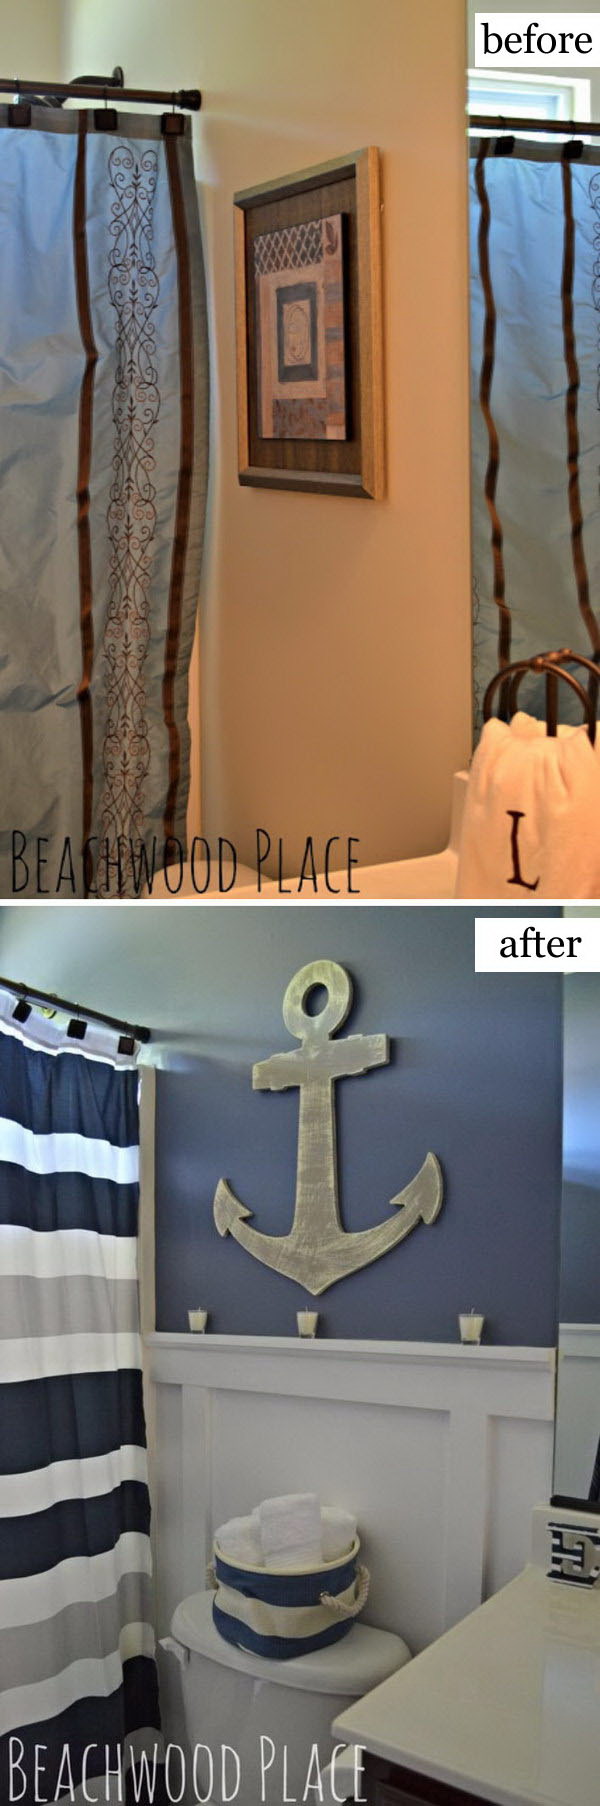 49 Most Beautiful Before and After Bathroom Makeovers